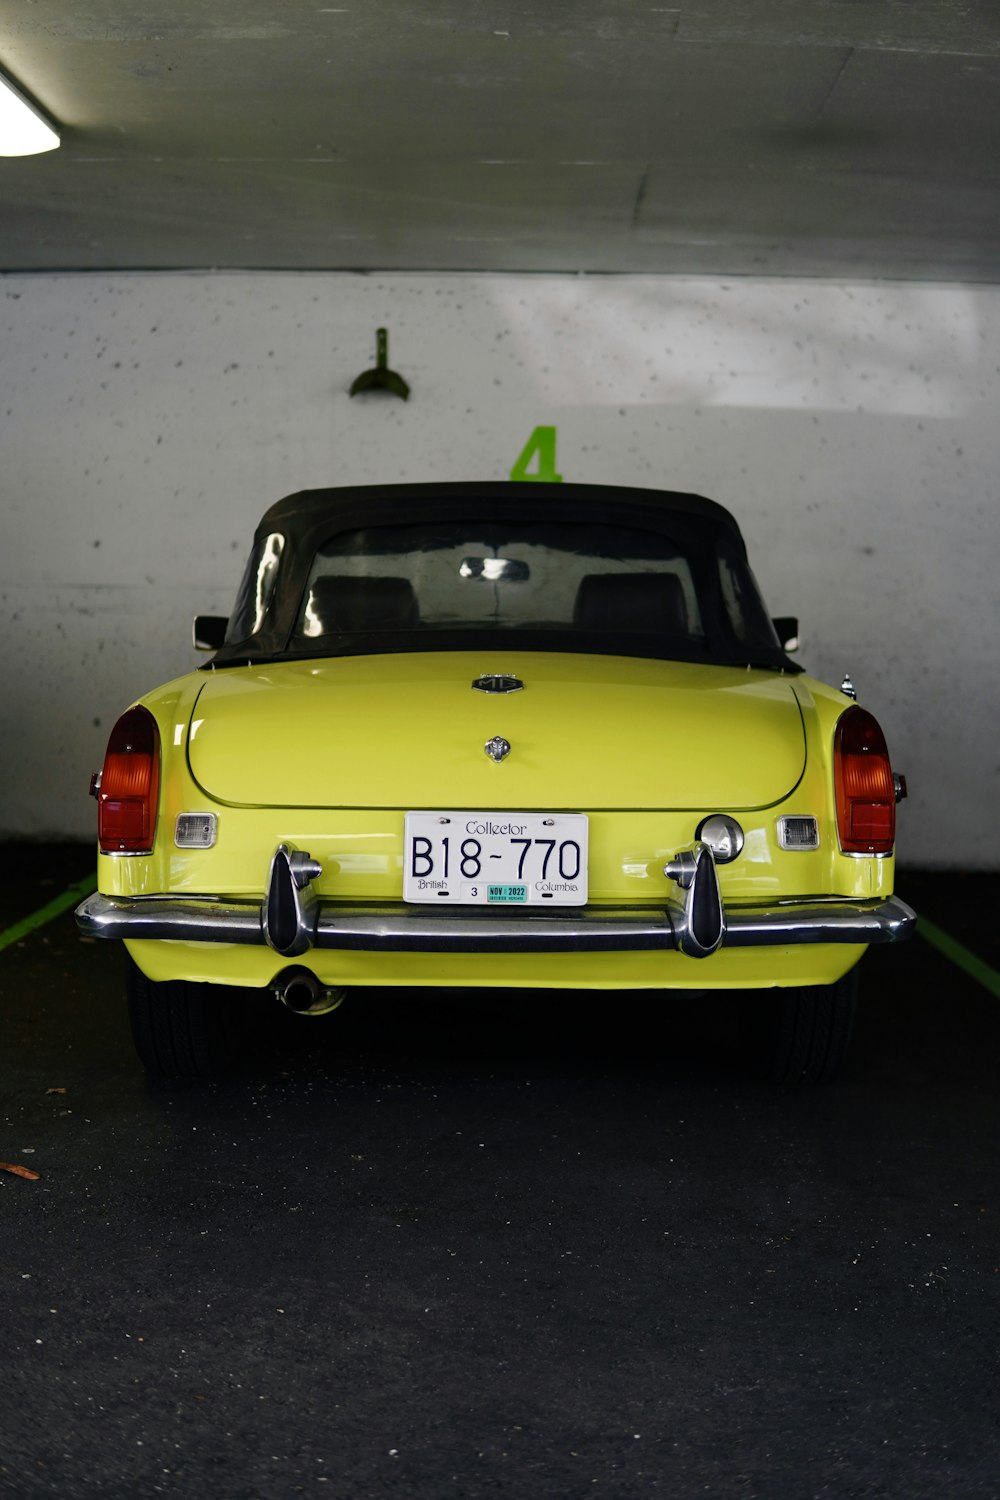 a yellow car parked in a parking garage